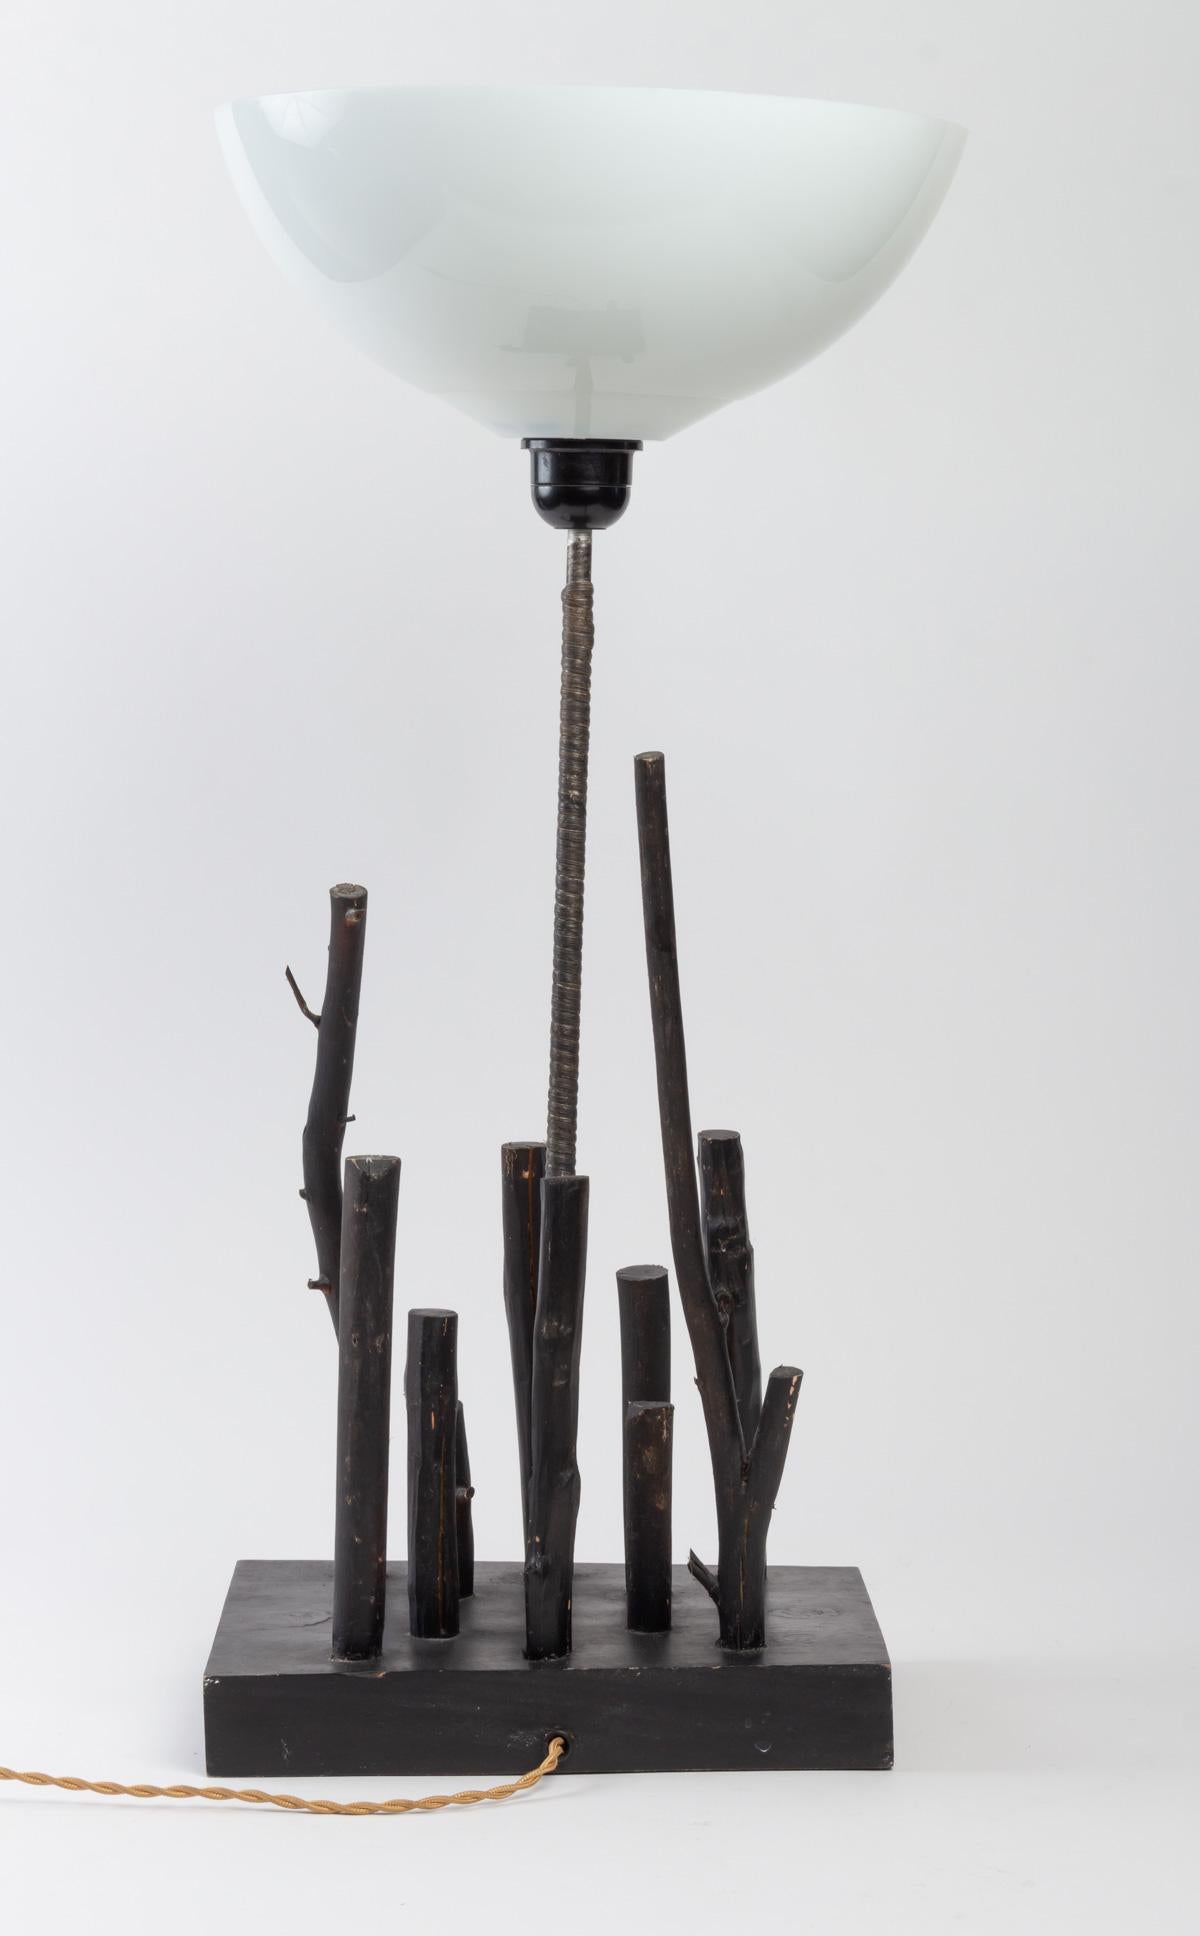 Lamp from the 1980s in wood and lampshade in polypropylene.
Measures: H 60 cm, W 25 cm, D 20 cm.